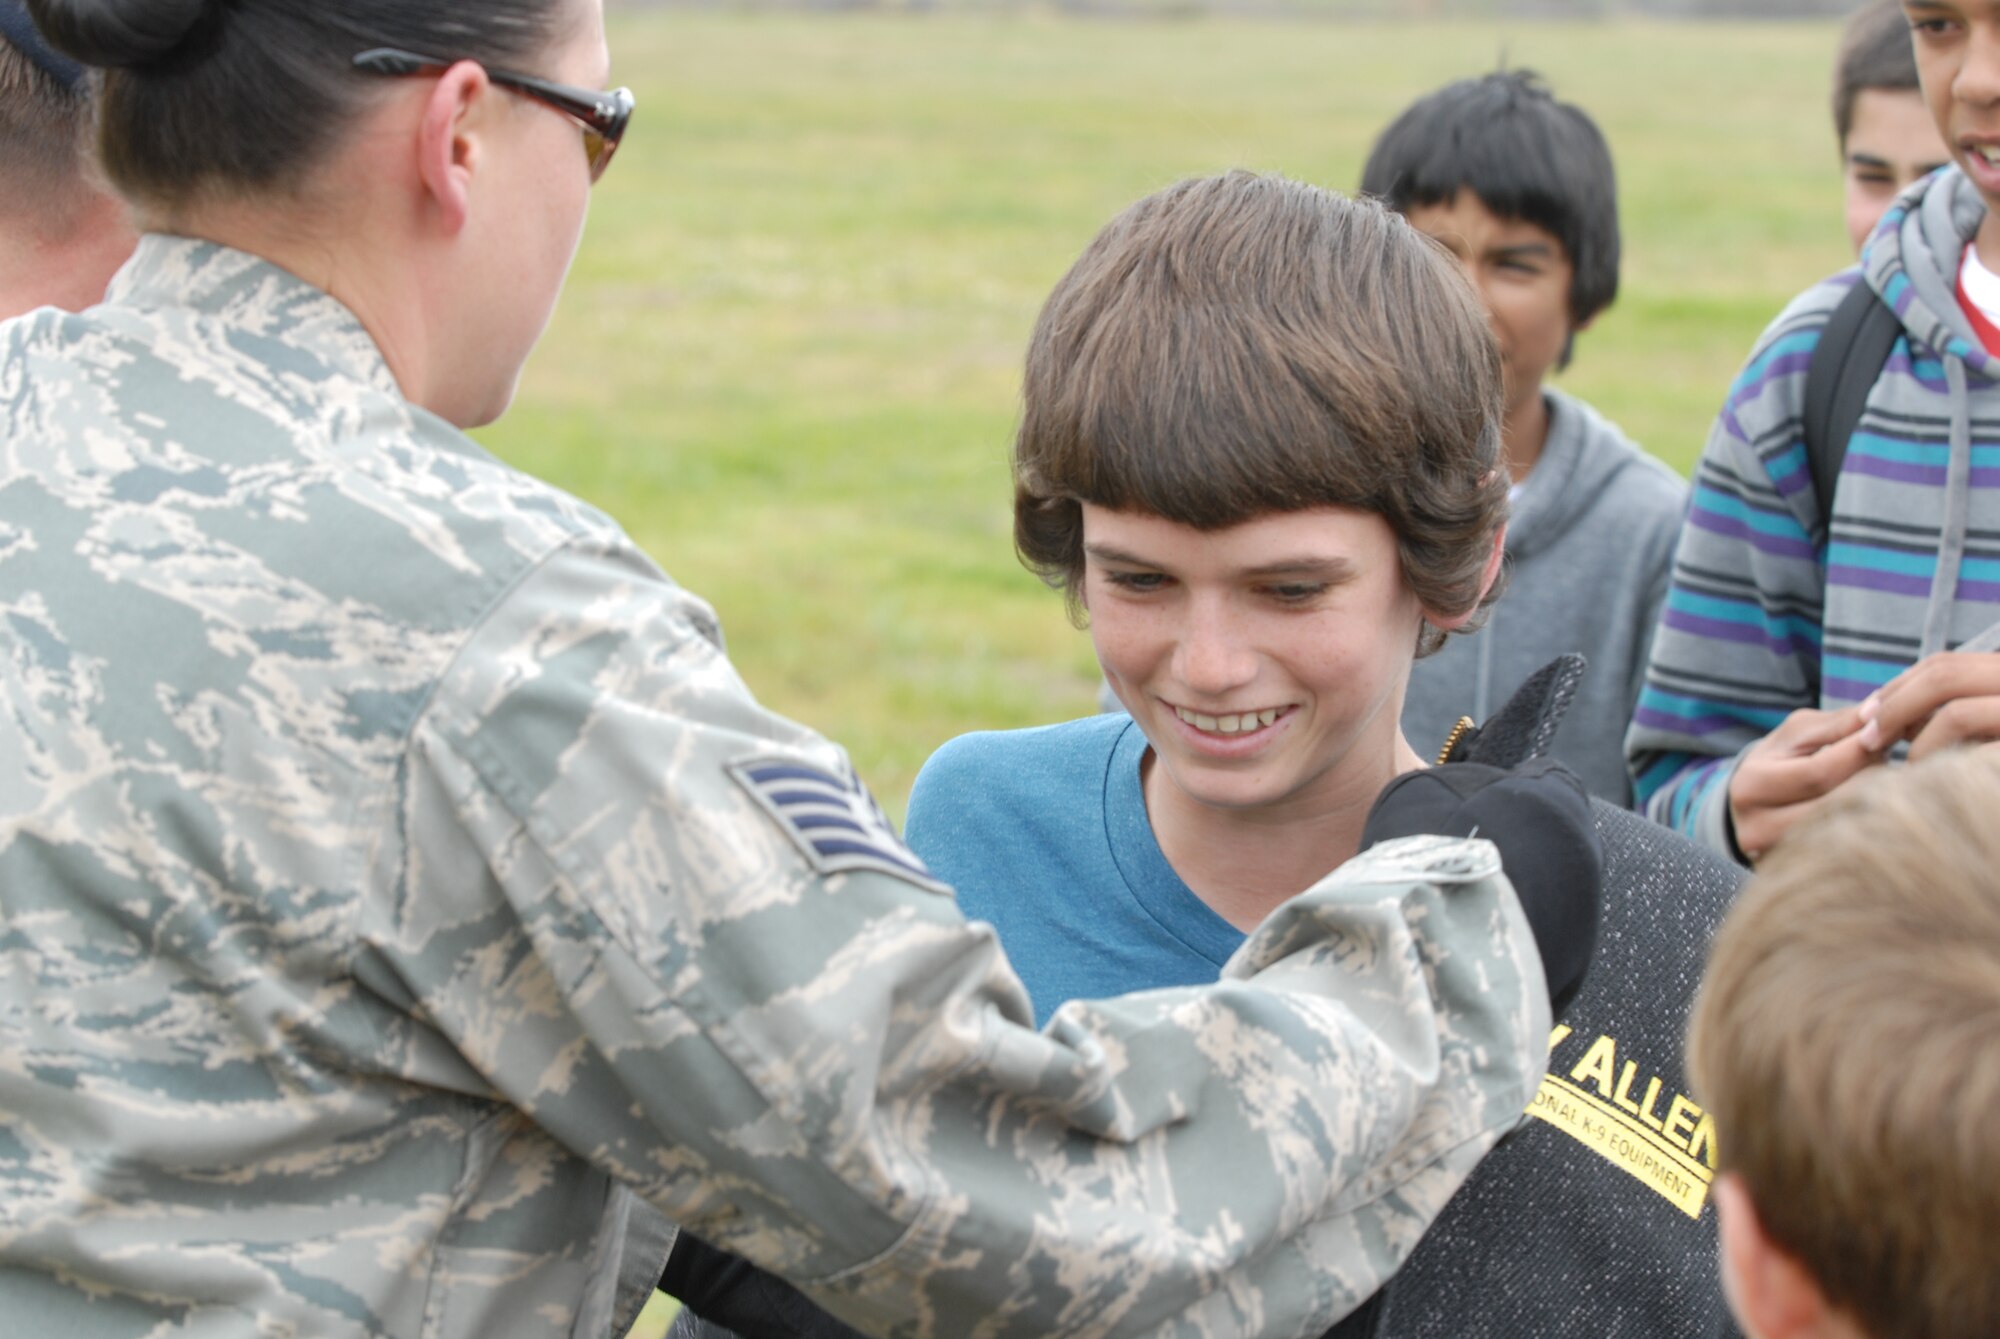 VANDENBERG AIR FORCE BASE, Calif. -- Staff Sgt. Terri Messina, a 30th Security Forces Squadron military working dog trainer, helps a Vandenberg Middle School student try on a bite jacket at a National Police Week event Monday, May 16, 2011. National Police Week, which occurs annually during the week of May 15, recognizes the service and sacrifice of U.S. law enforcement personnel. (U.S. Air Force photo/Jerry E. Clemens, Jr.)
